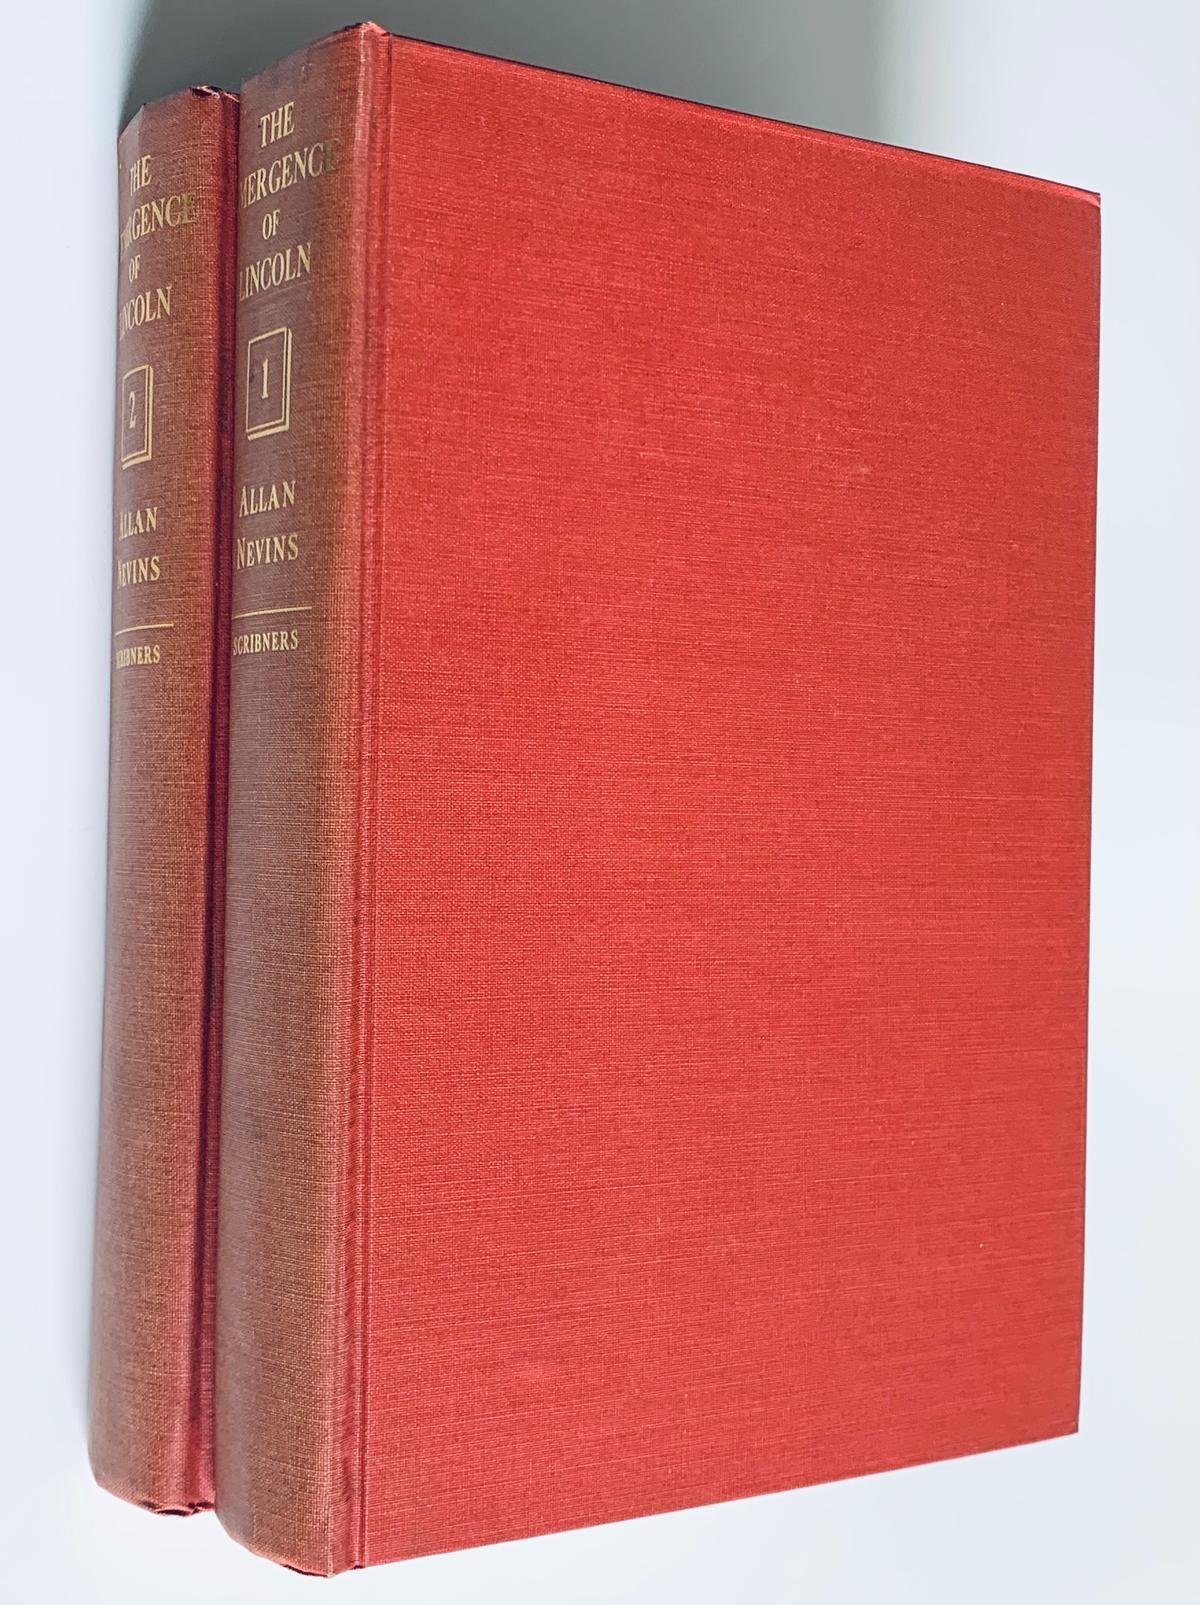 SIGNED The Emergence of Lincoln (1950) by Allan Nevins - Two Volumes